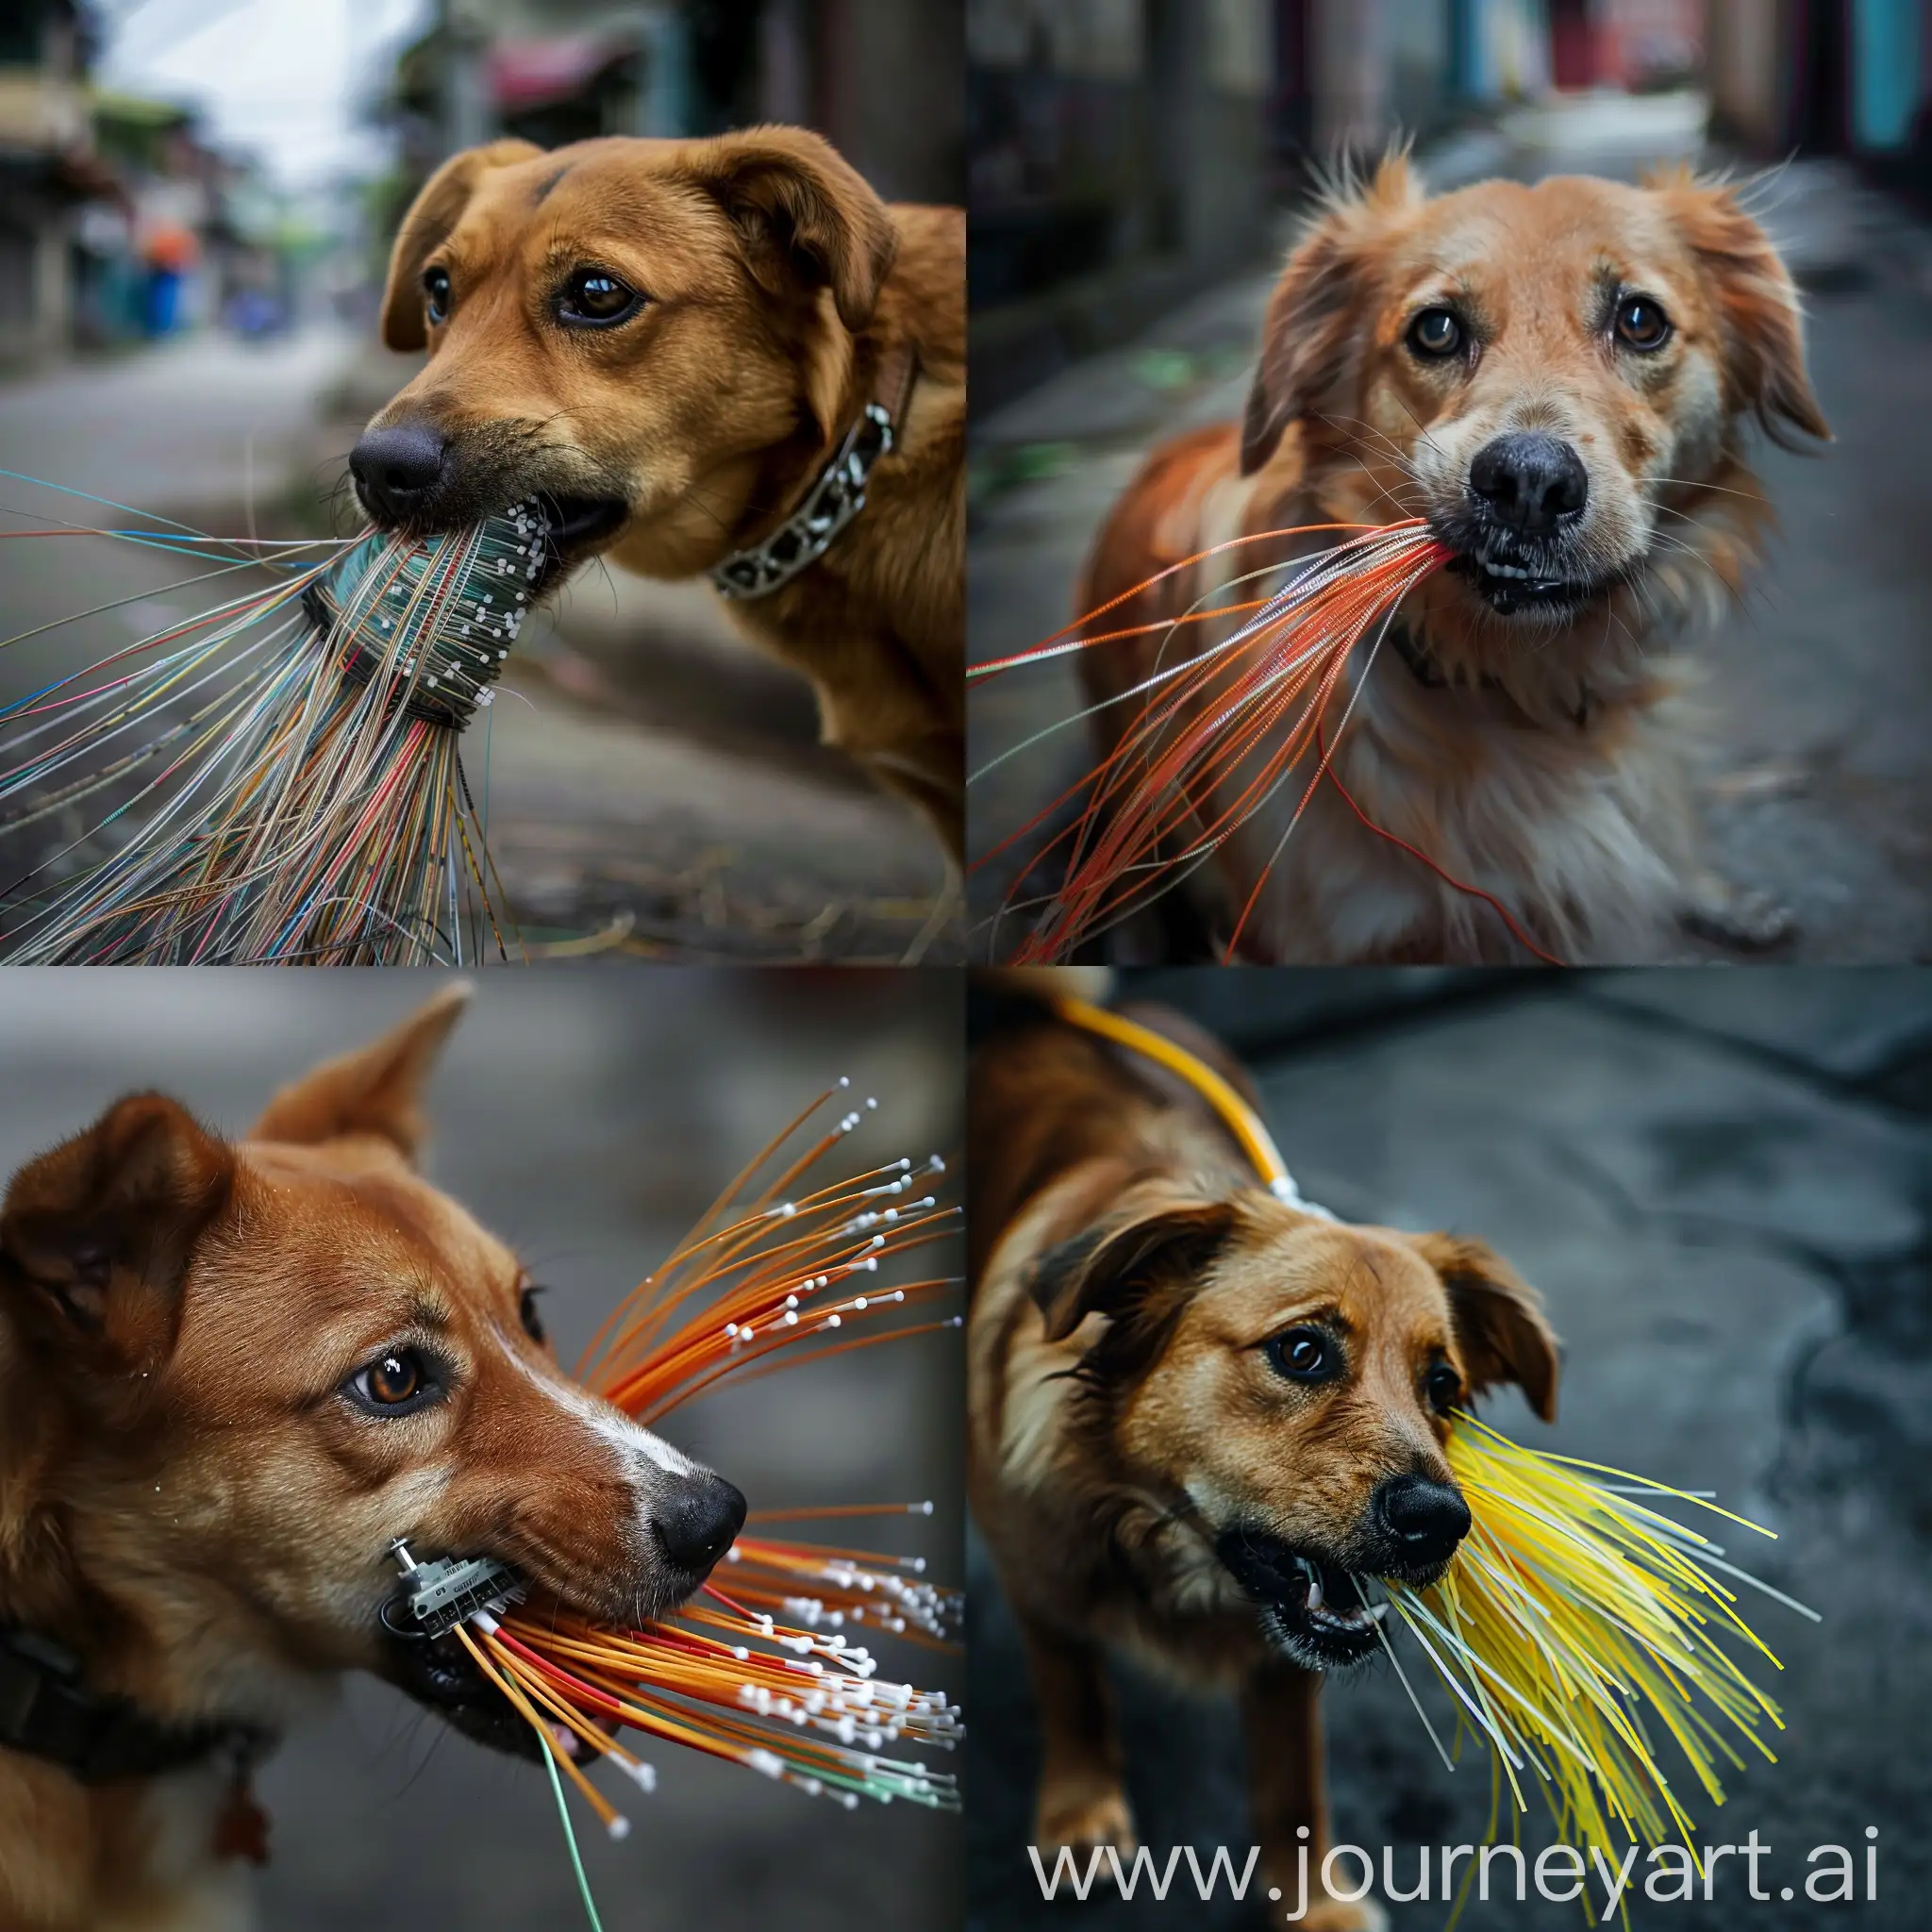 A dog is eating a optical fiber wire in Street